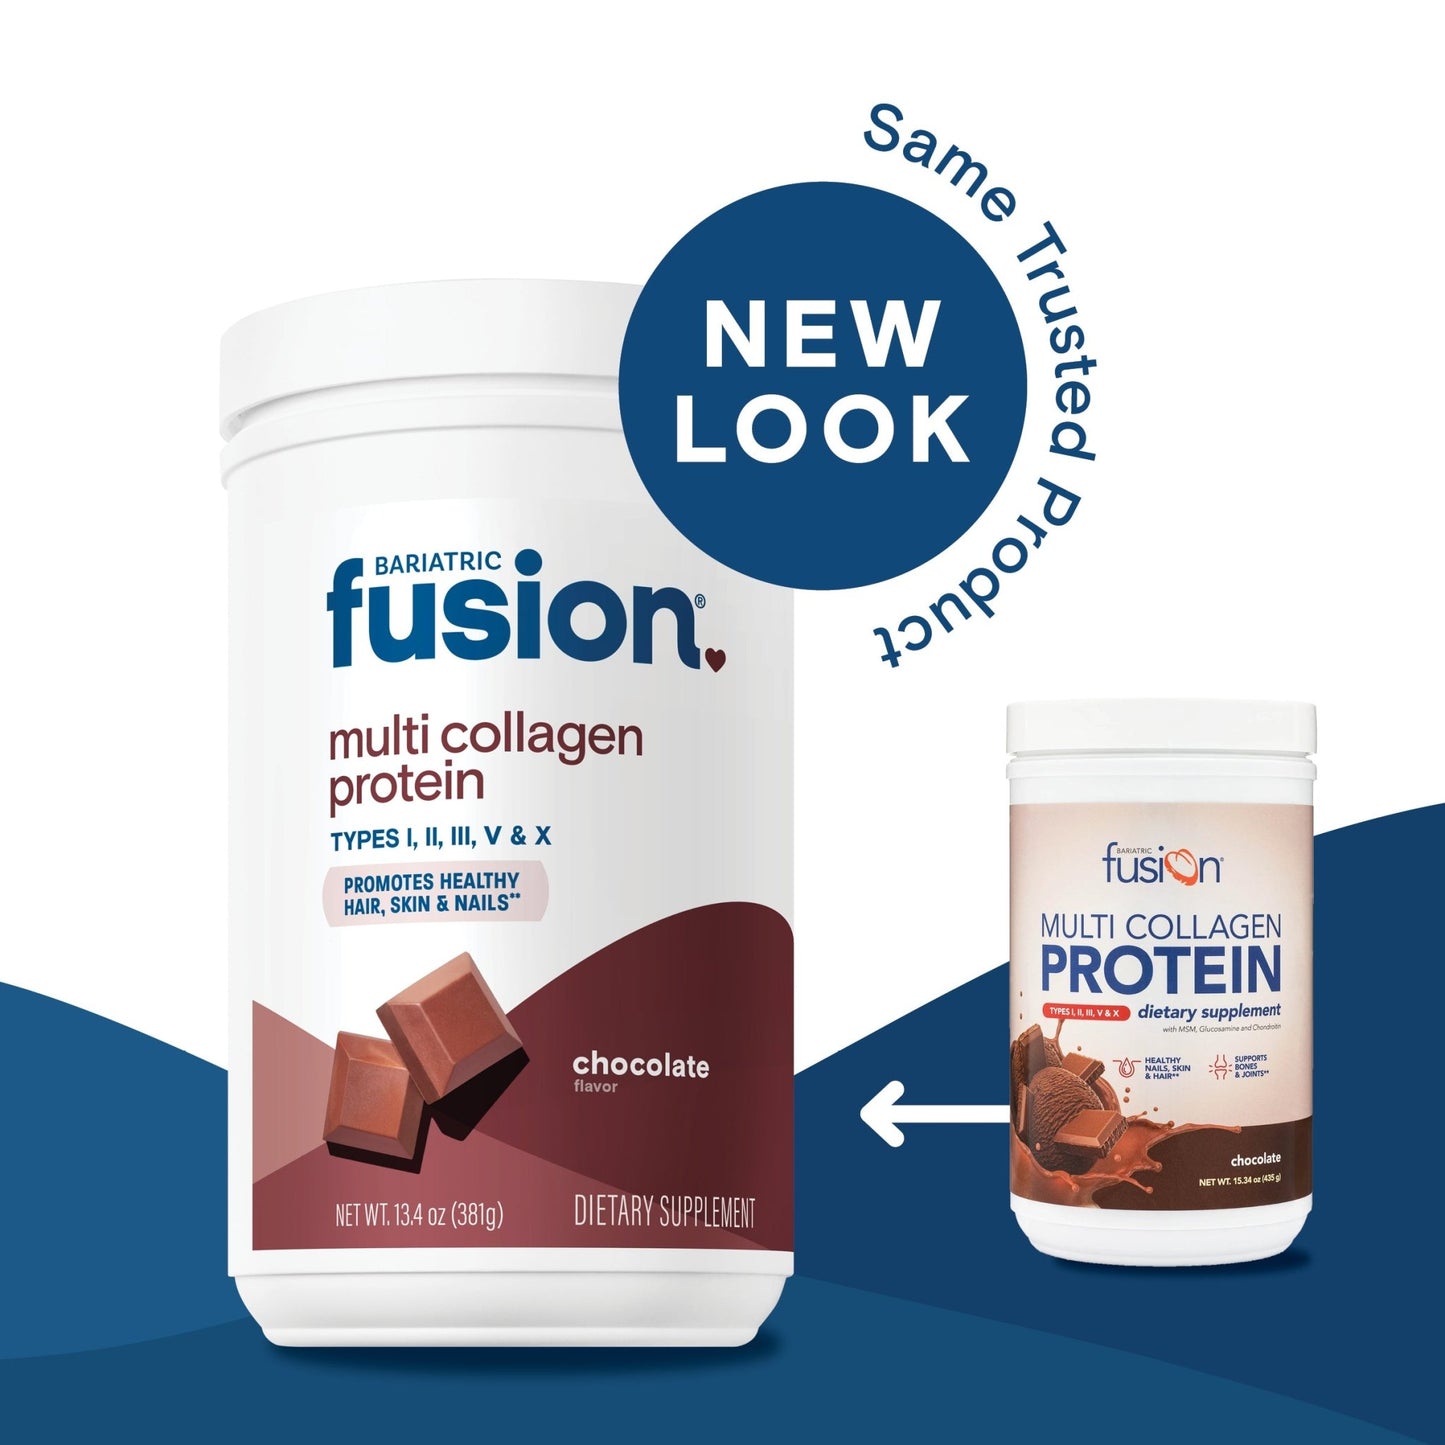 Chocolate Multi Collagen Protein Powder new look, same trusted product.